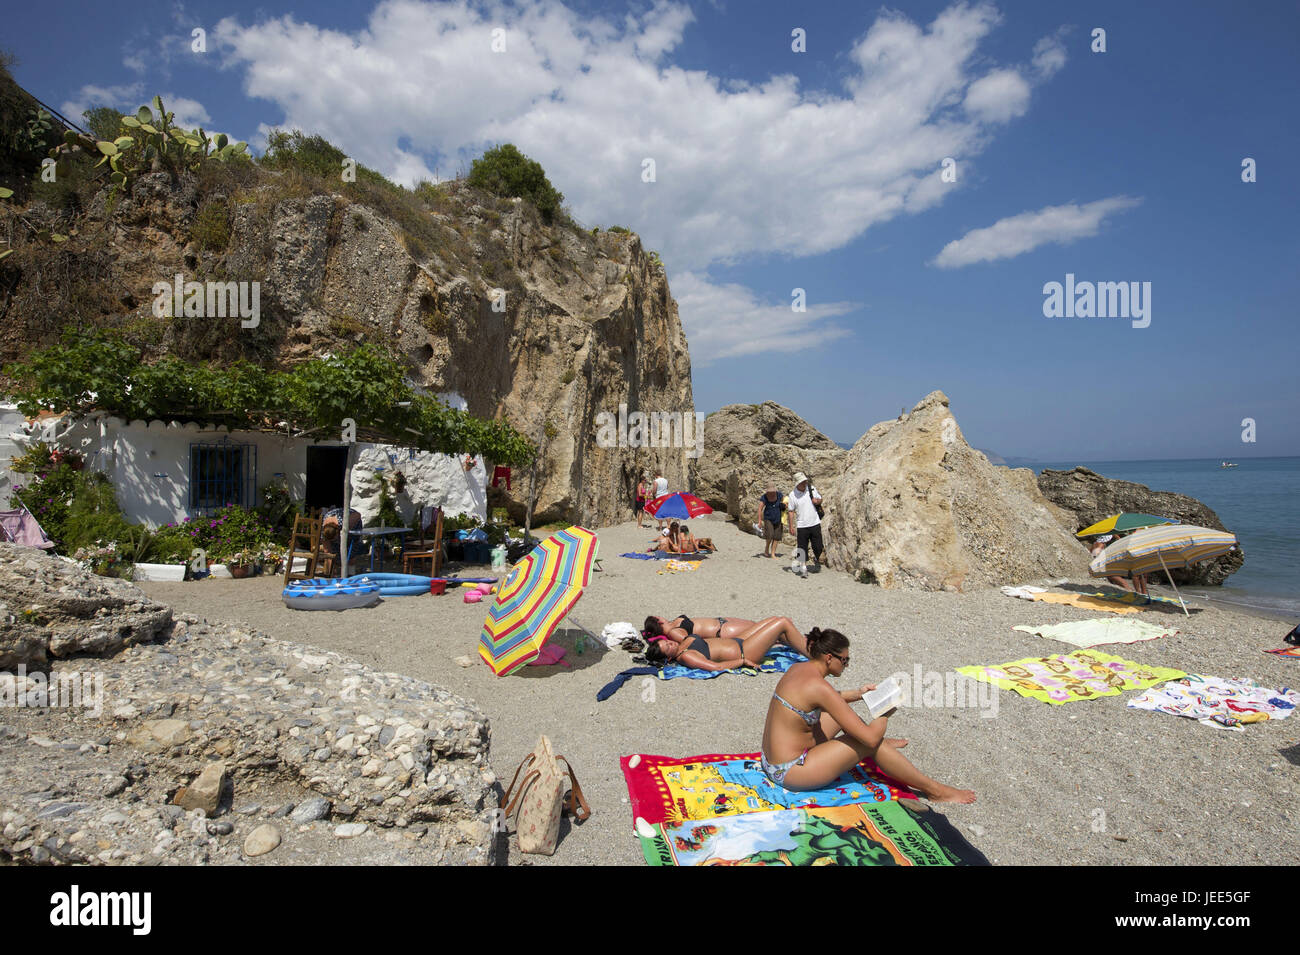 Spain, Andalusia, Costa del Sol, Nerja, vacationer in the sandy beach, Stock Photo